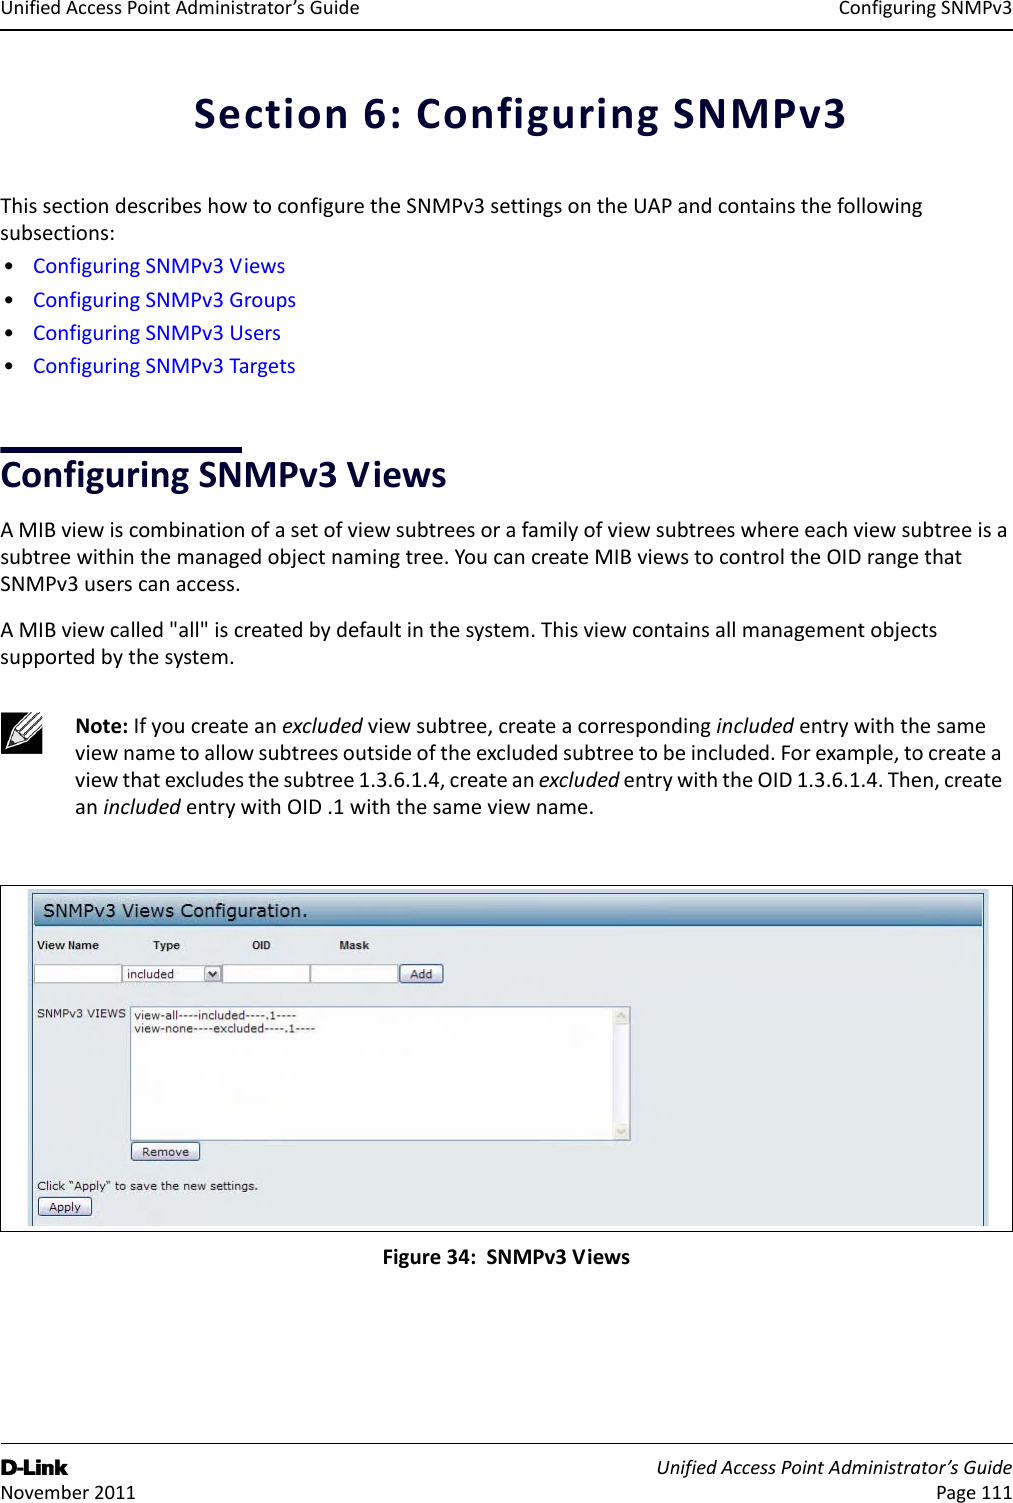 ConfiguringSNMPv3D-Link UnifiedAccessPointAdministrator’sGuide November2011 Page111UnifiedAccessPointAdministrator’sGuideSection6:ConfiguringSNMPv3ThissectiondescribeshowtoconfiguretheSNMPv3settingsontheUAPandcontainsthefollowingsubsections:•ConfiguringSNMPv3Views•ConfiguringSNMPv3Groups•ConfiguringSNMPv3Users•ConfiguringSNMPv3TargetsConfiguringSNMPv3ViewsAMIBviewiscombinationofasetofviewsubtreesorafamilyofviewsubtreeswhereeachviewsubtreeisasubtreewithinthemanagedobjectnamingtree.YoucancreateMIBviewstocontroltheOIDrangethatSNMPv3userscanaccess.AMIBviewcalled&quot;all&quot;iscreatedbydefaultinthesystem.Thisviewcontainsallmanagementobjectssupportedbythesystem.Figure34:SNMPv3ViewsNote:Ifyoucreateanexcludedviewsubtree,createacorrespondingincludedentrywiththesameviewnametoallowsubtreesoutsideoftheexcludedsubtreetobeincluded.Forexample,tocreateaviewthatexcludesthesubtree1.3.6.1.4,createanexcludedentrywiththeOID1.3.6.1.4.Then,createanincludedentrywithOID.1withthesameviewname.